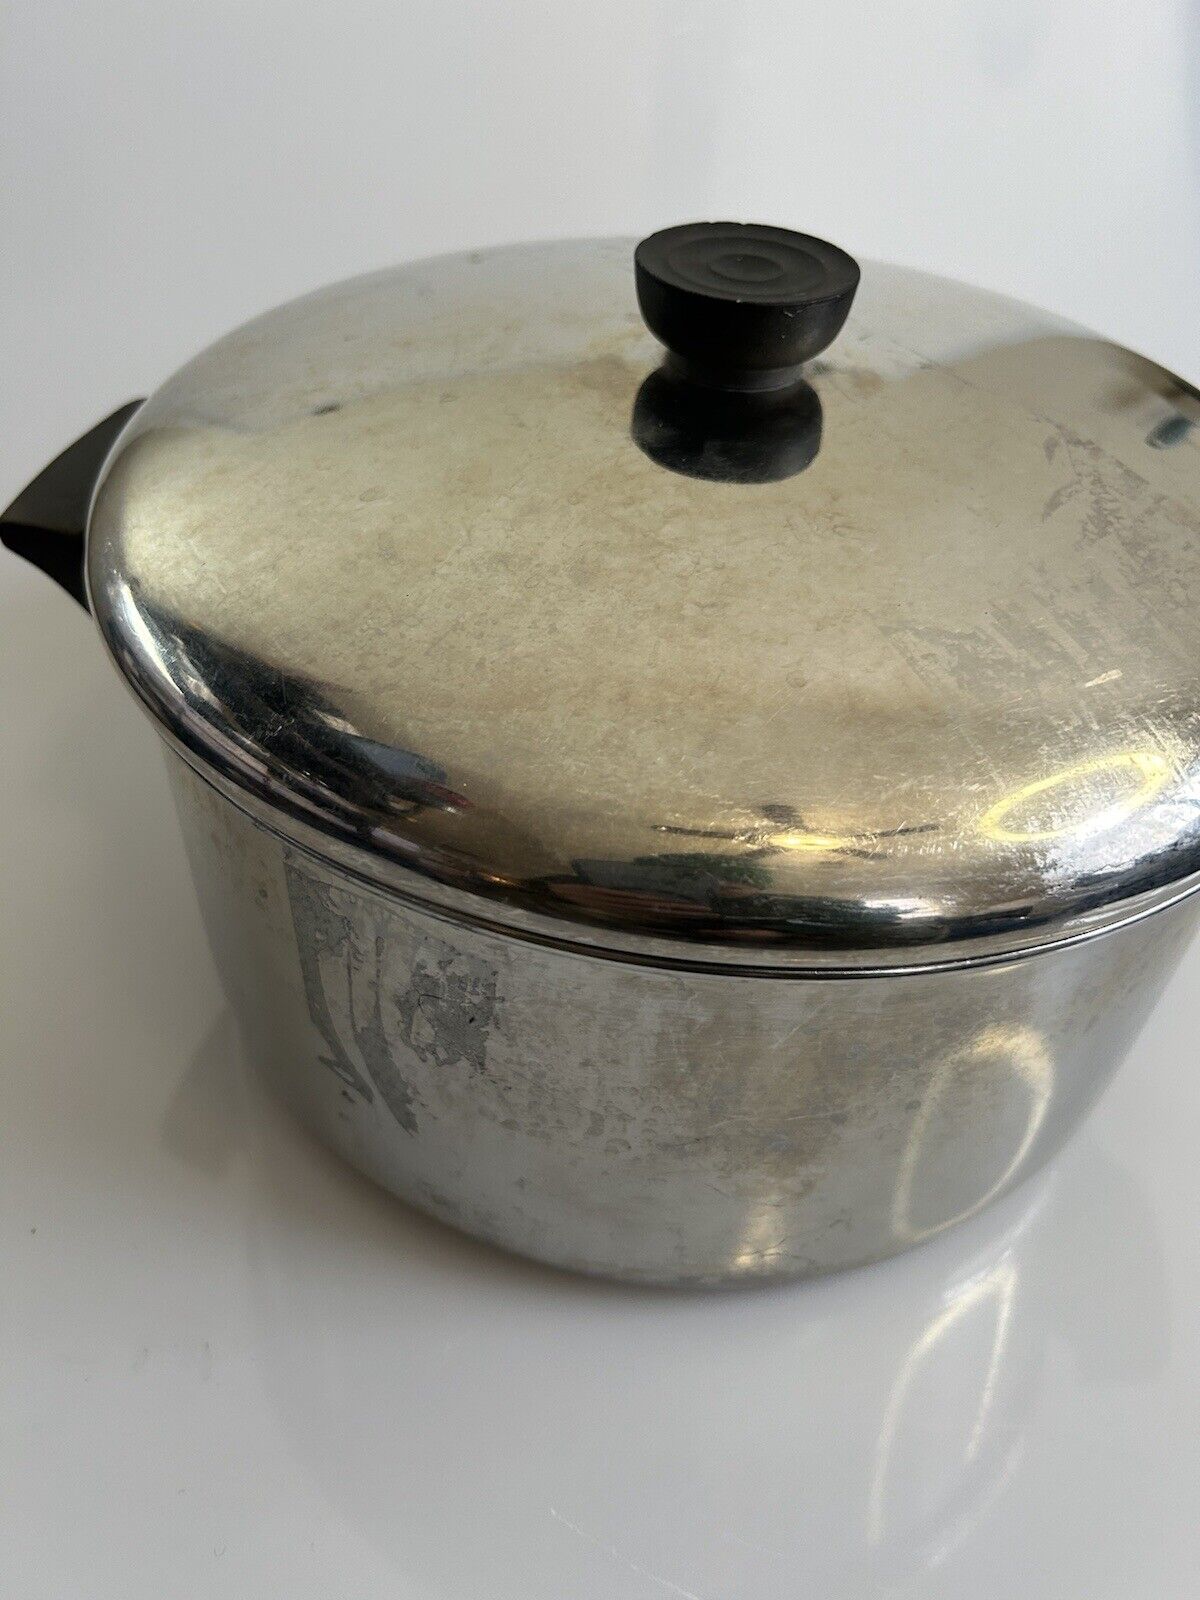 Vintage 1801 Revere Ware 6 QT Stock Pot with Lid Made in USA